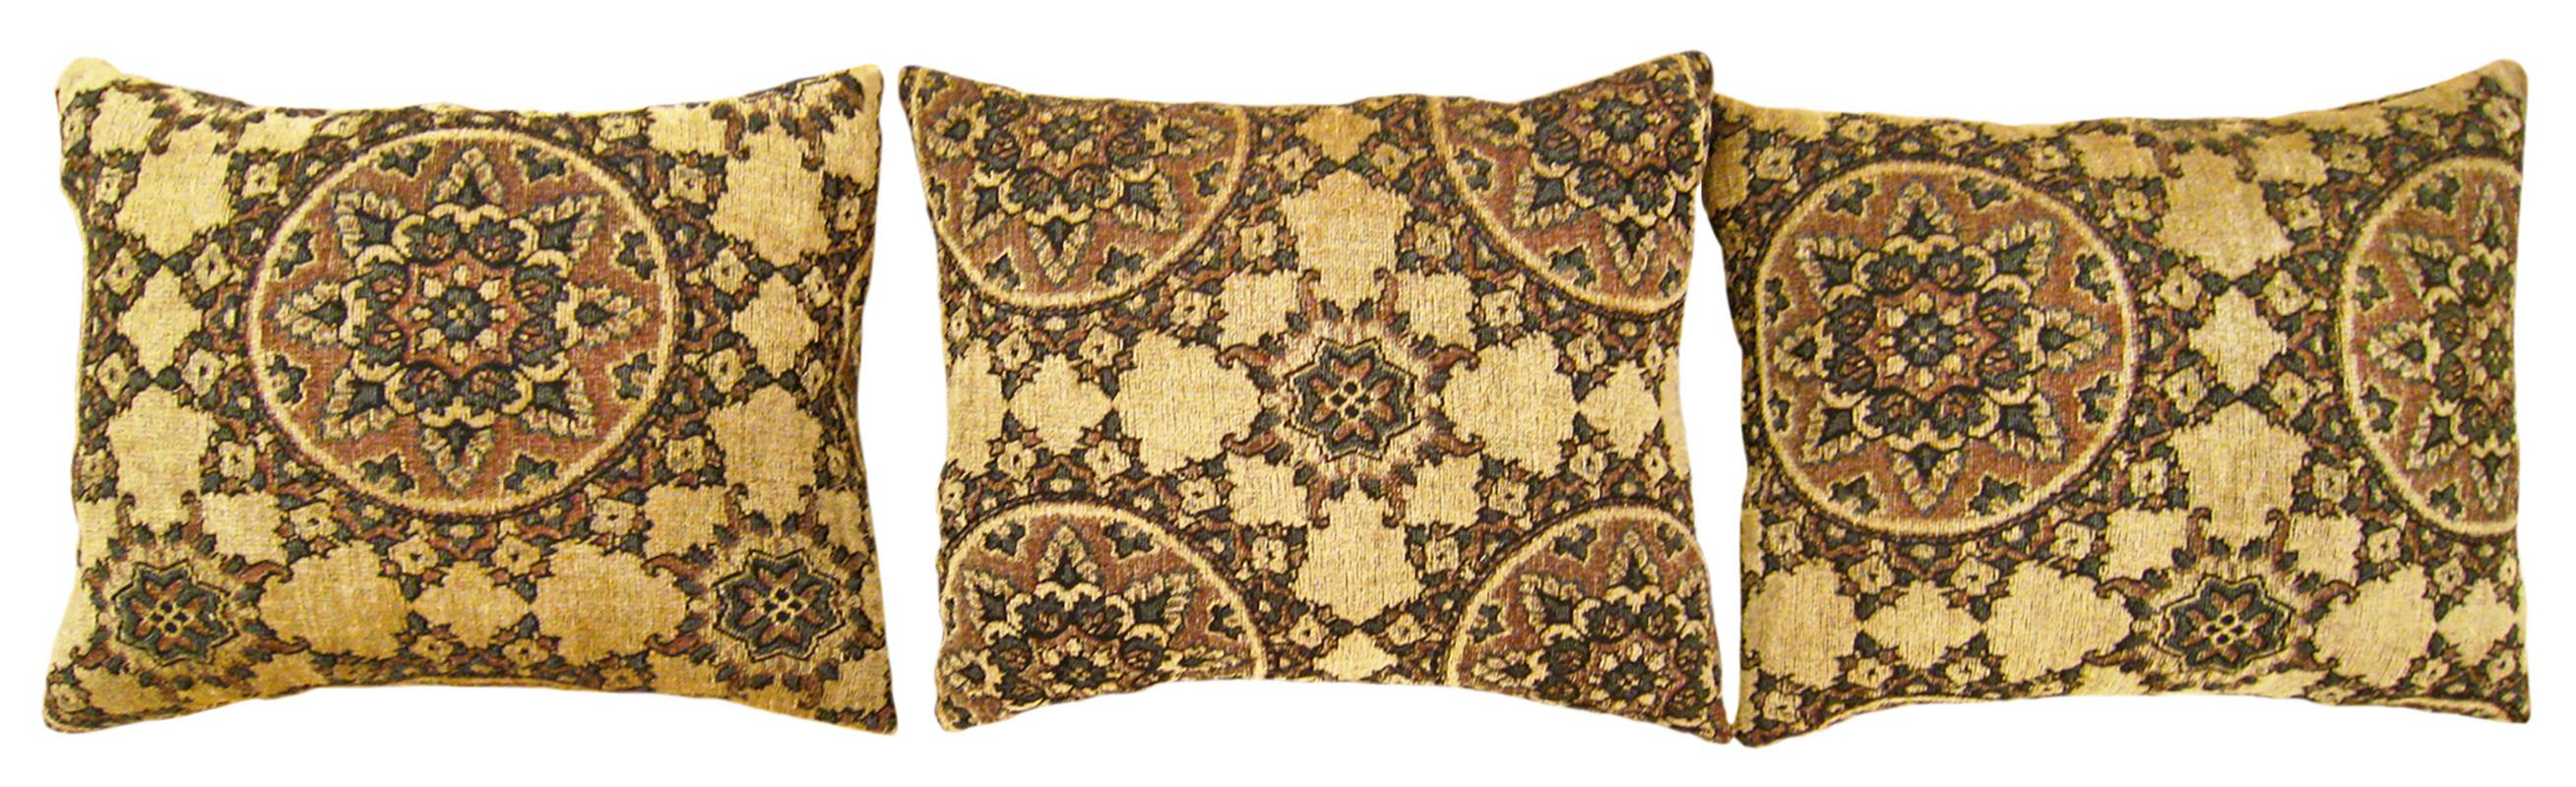 A set of vintage American Taperstry circle rug pillows ; size 20” x 18” Each.

A vintage decorative pillows with circles design motif in a brown central field, size 20” x 18” each. This lovely decorative pillow features an antique rug on front